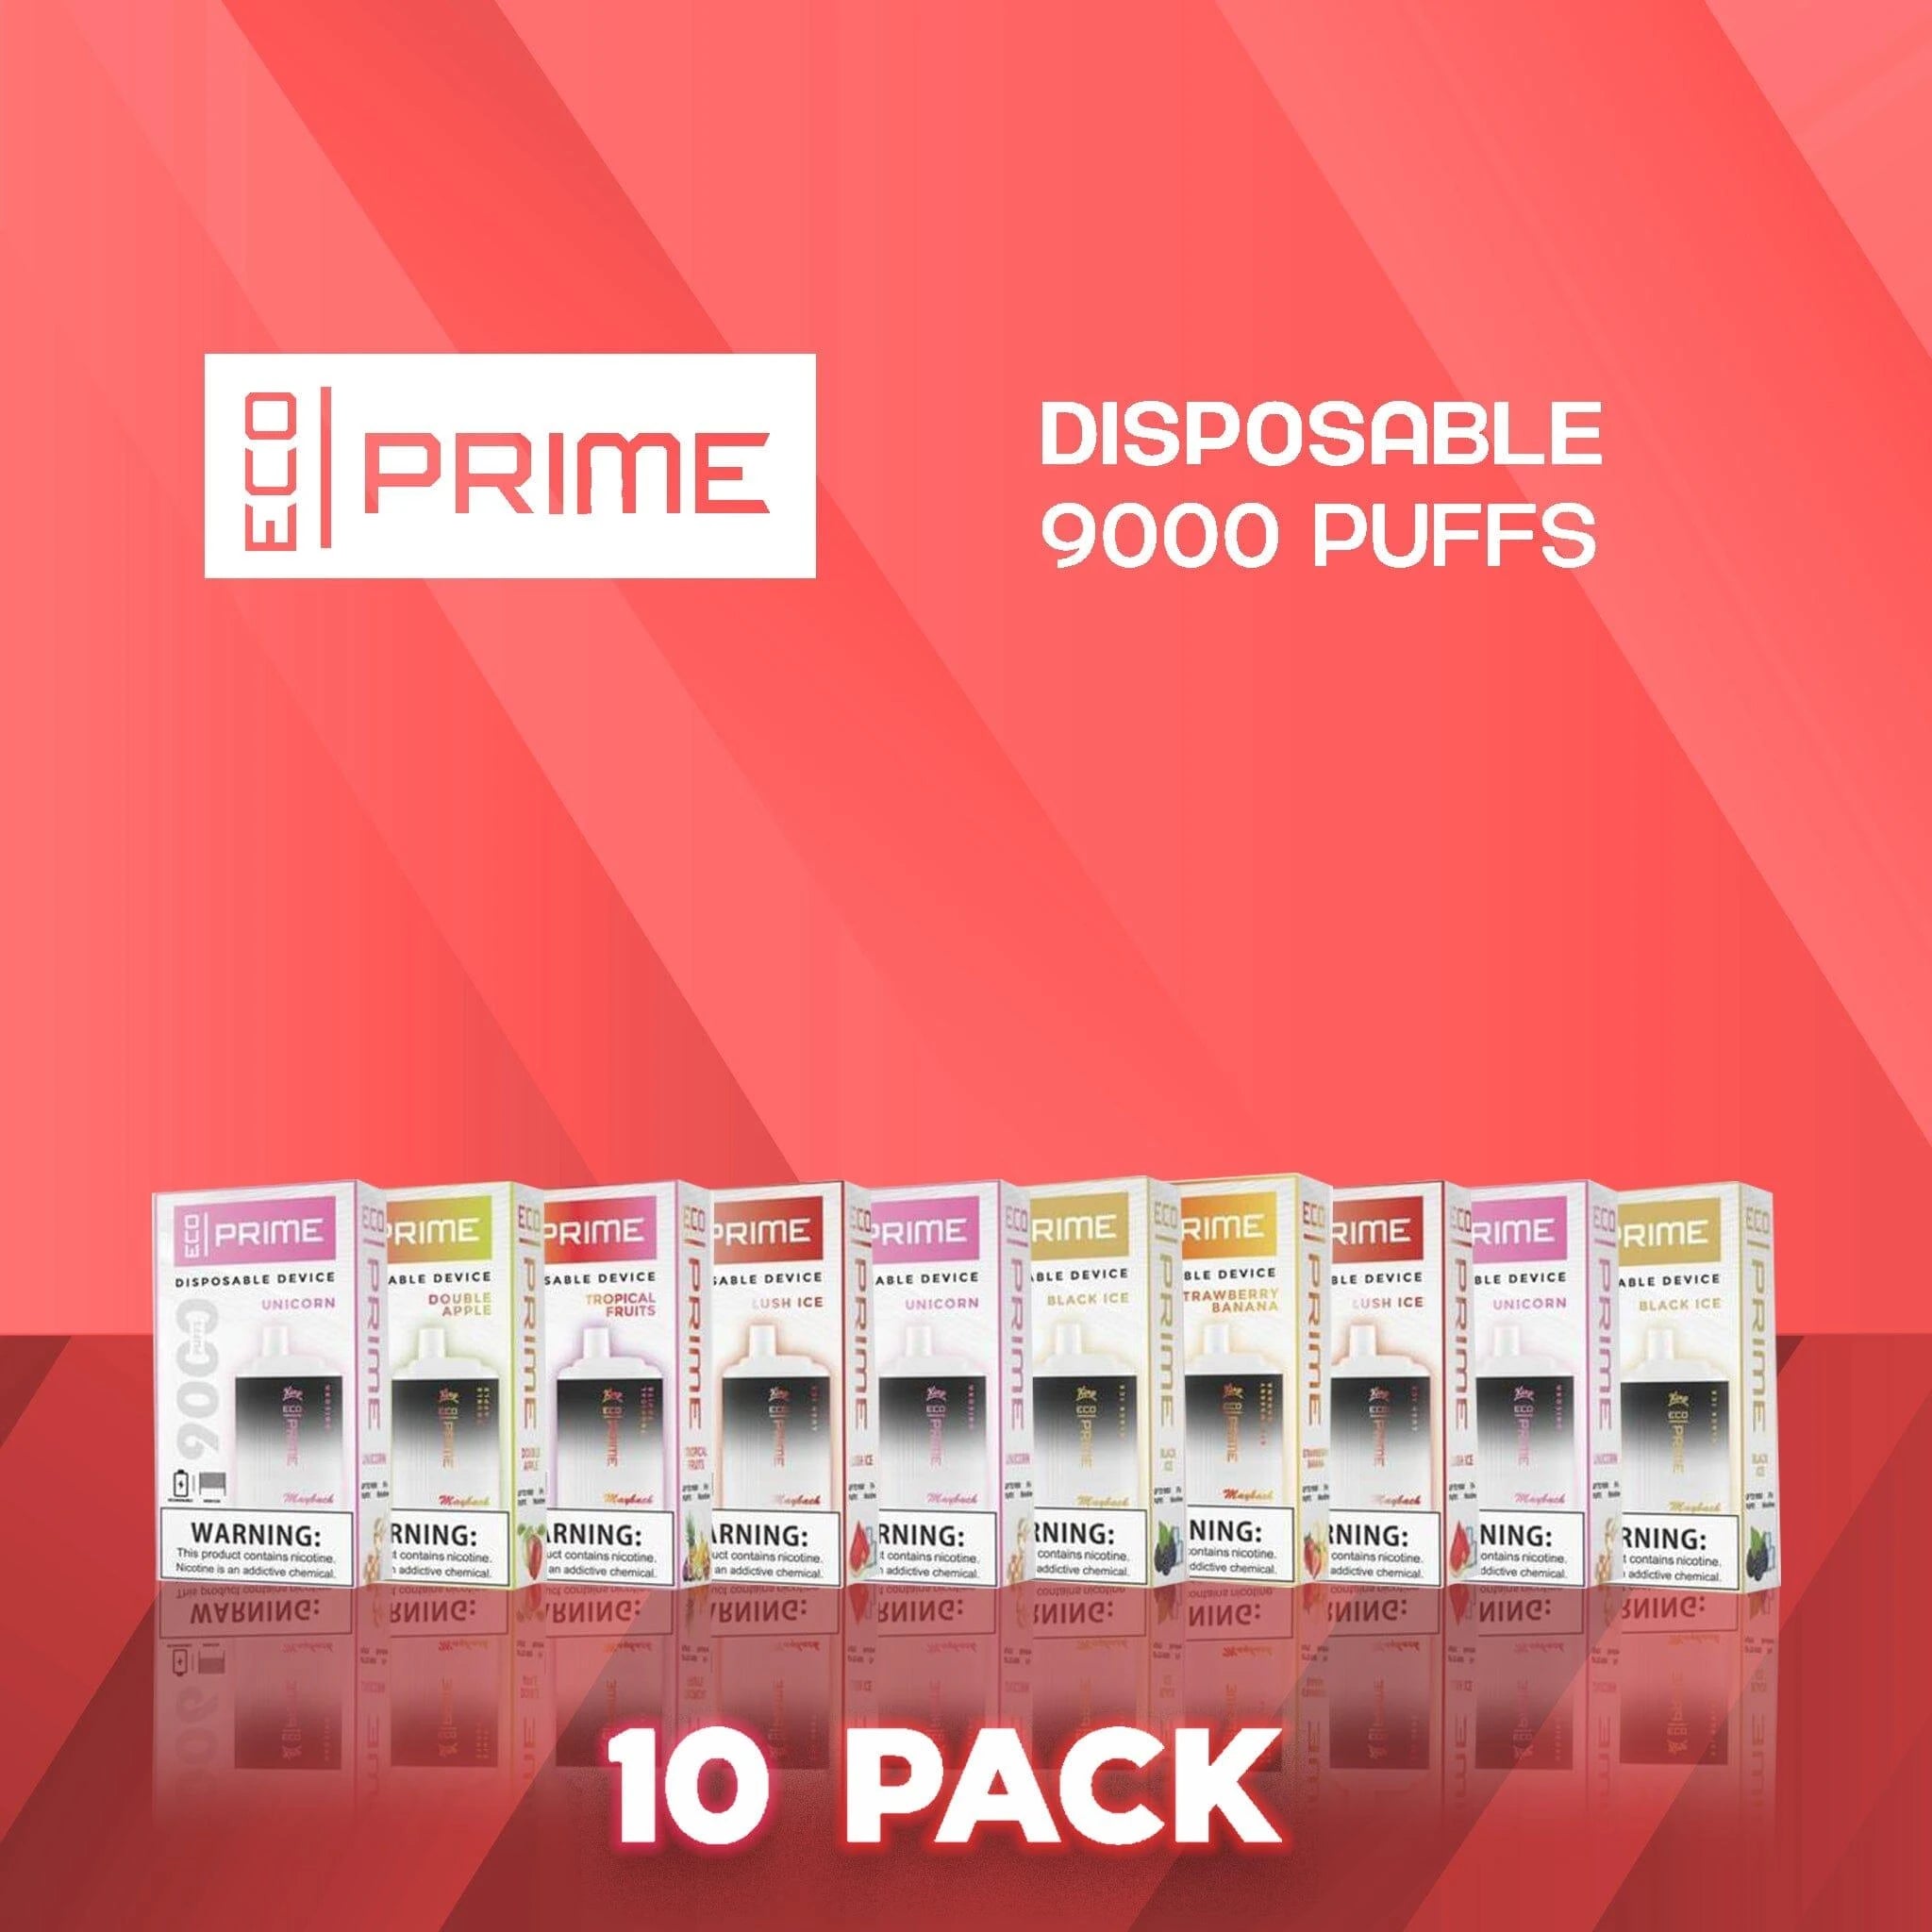 Eco Prime 9000 Puffs Disposable Vape - 10 Pack